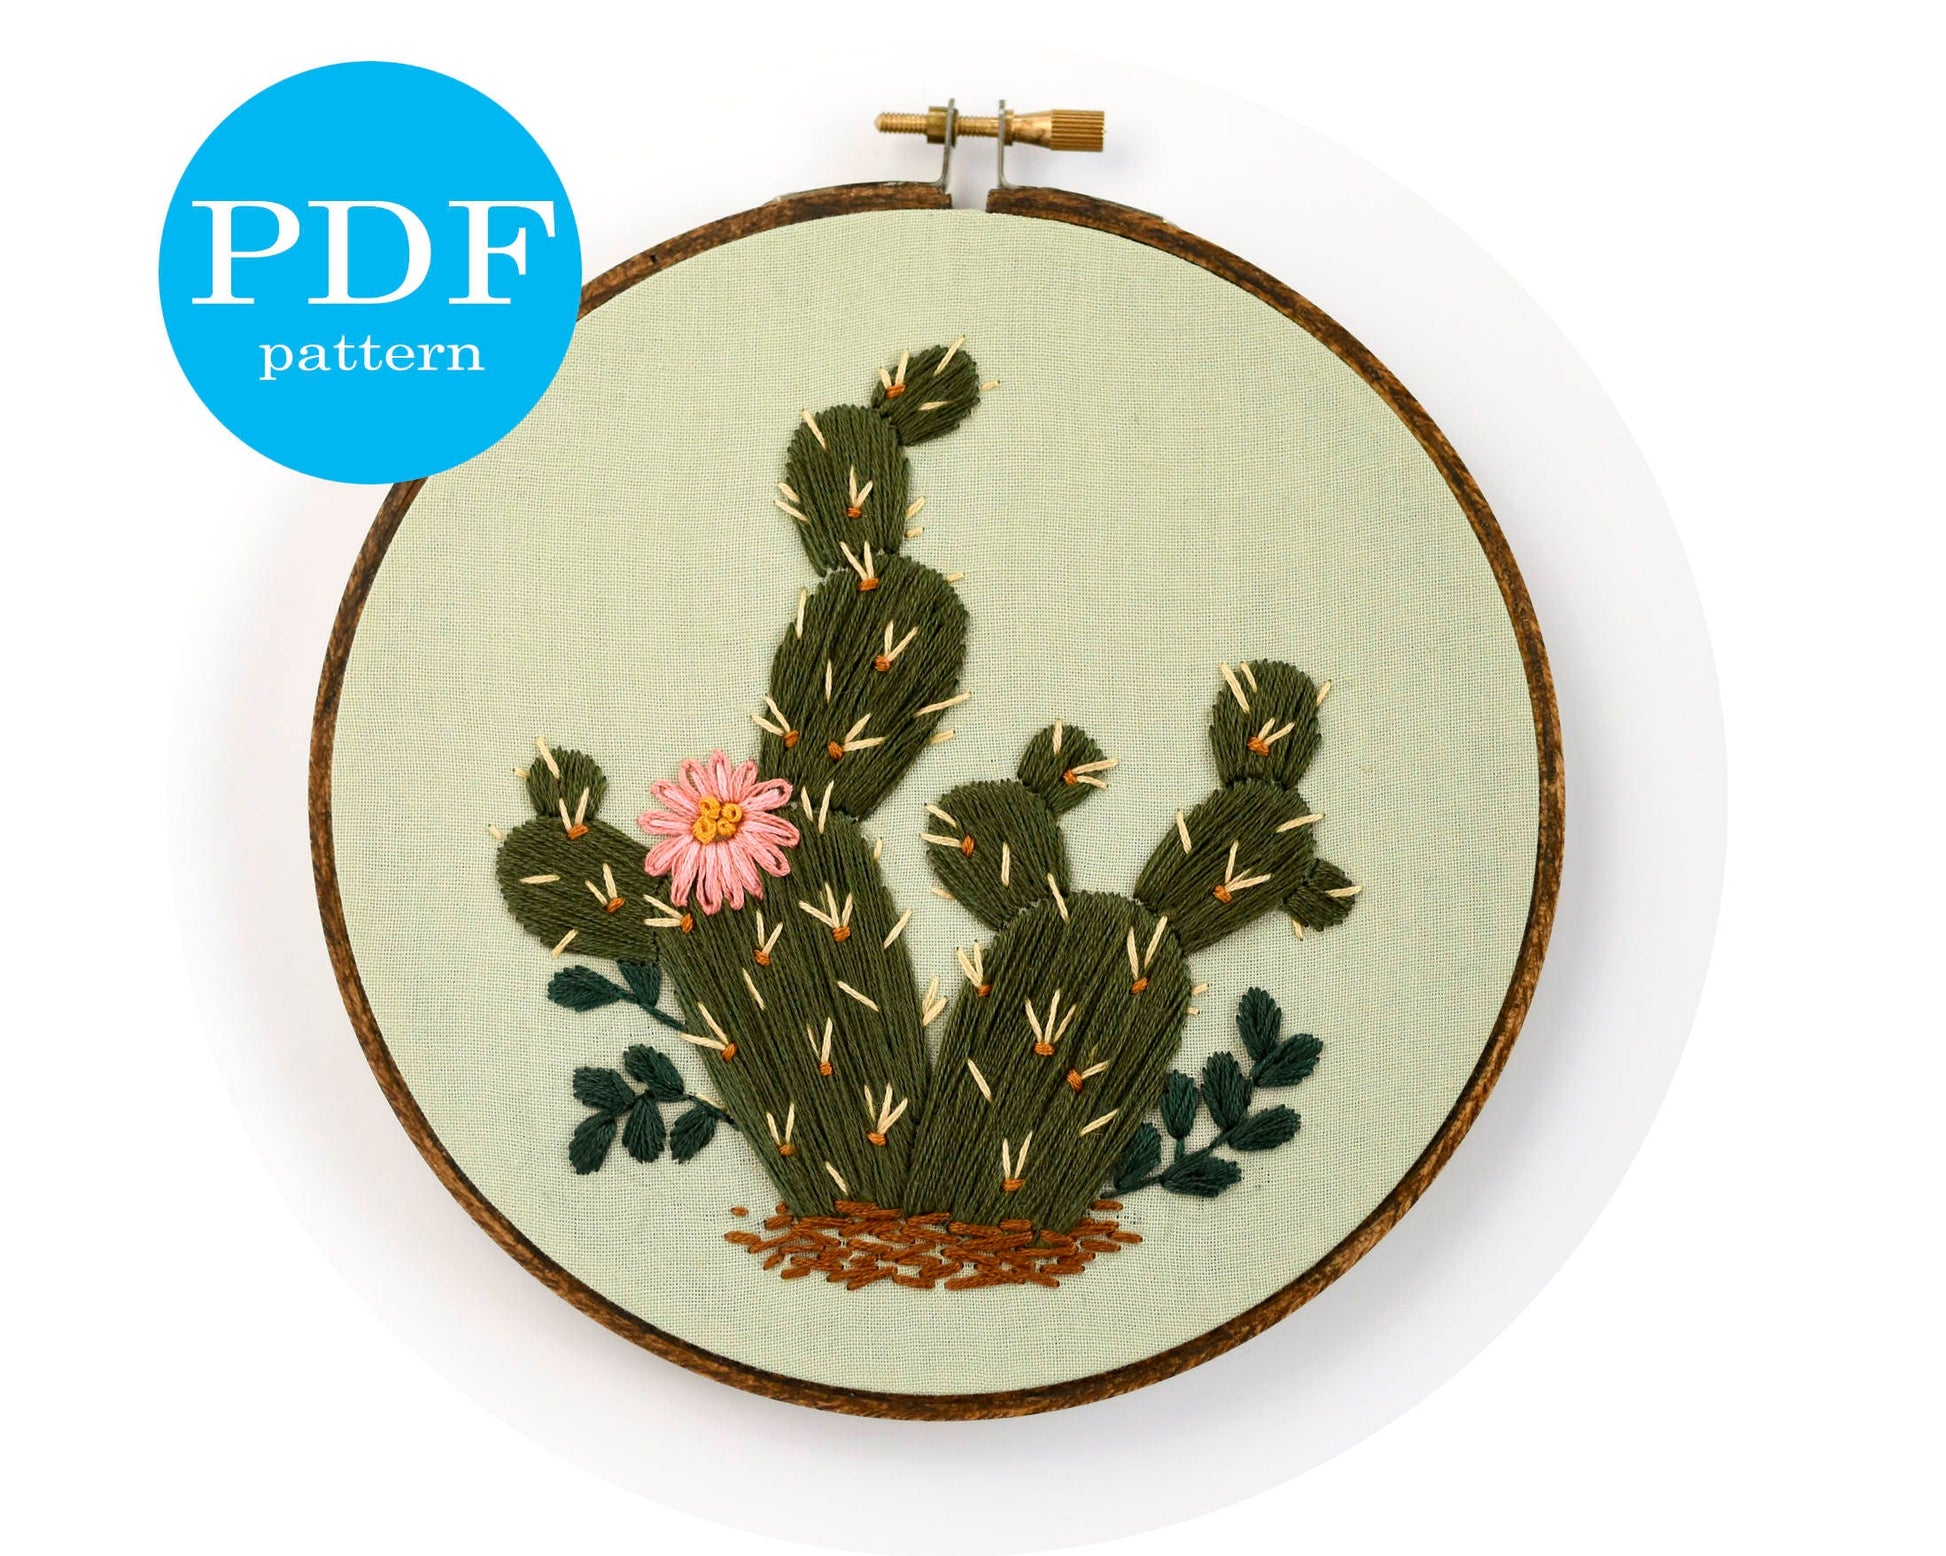 Cactus Embroidery Pattern. Digital Download. 6" embroidery hoop. DIY Home Decor. Beginner Embroidery. Prickly Pear embroidery pattern. Boho